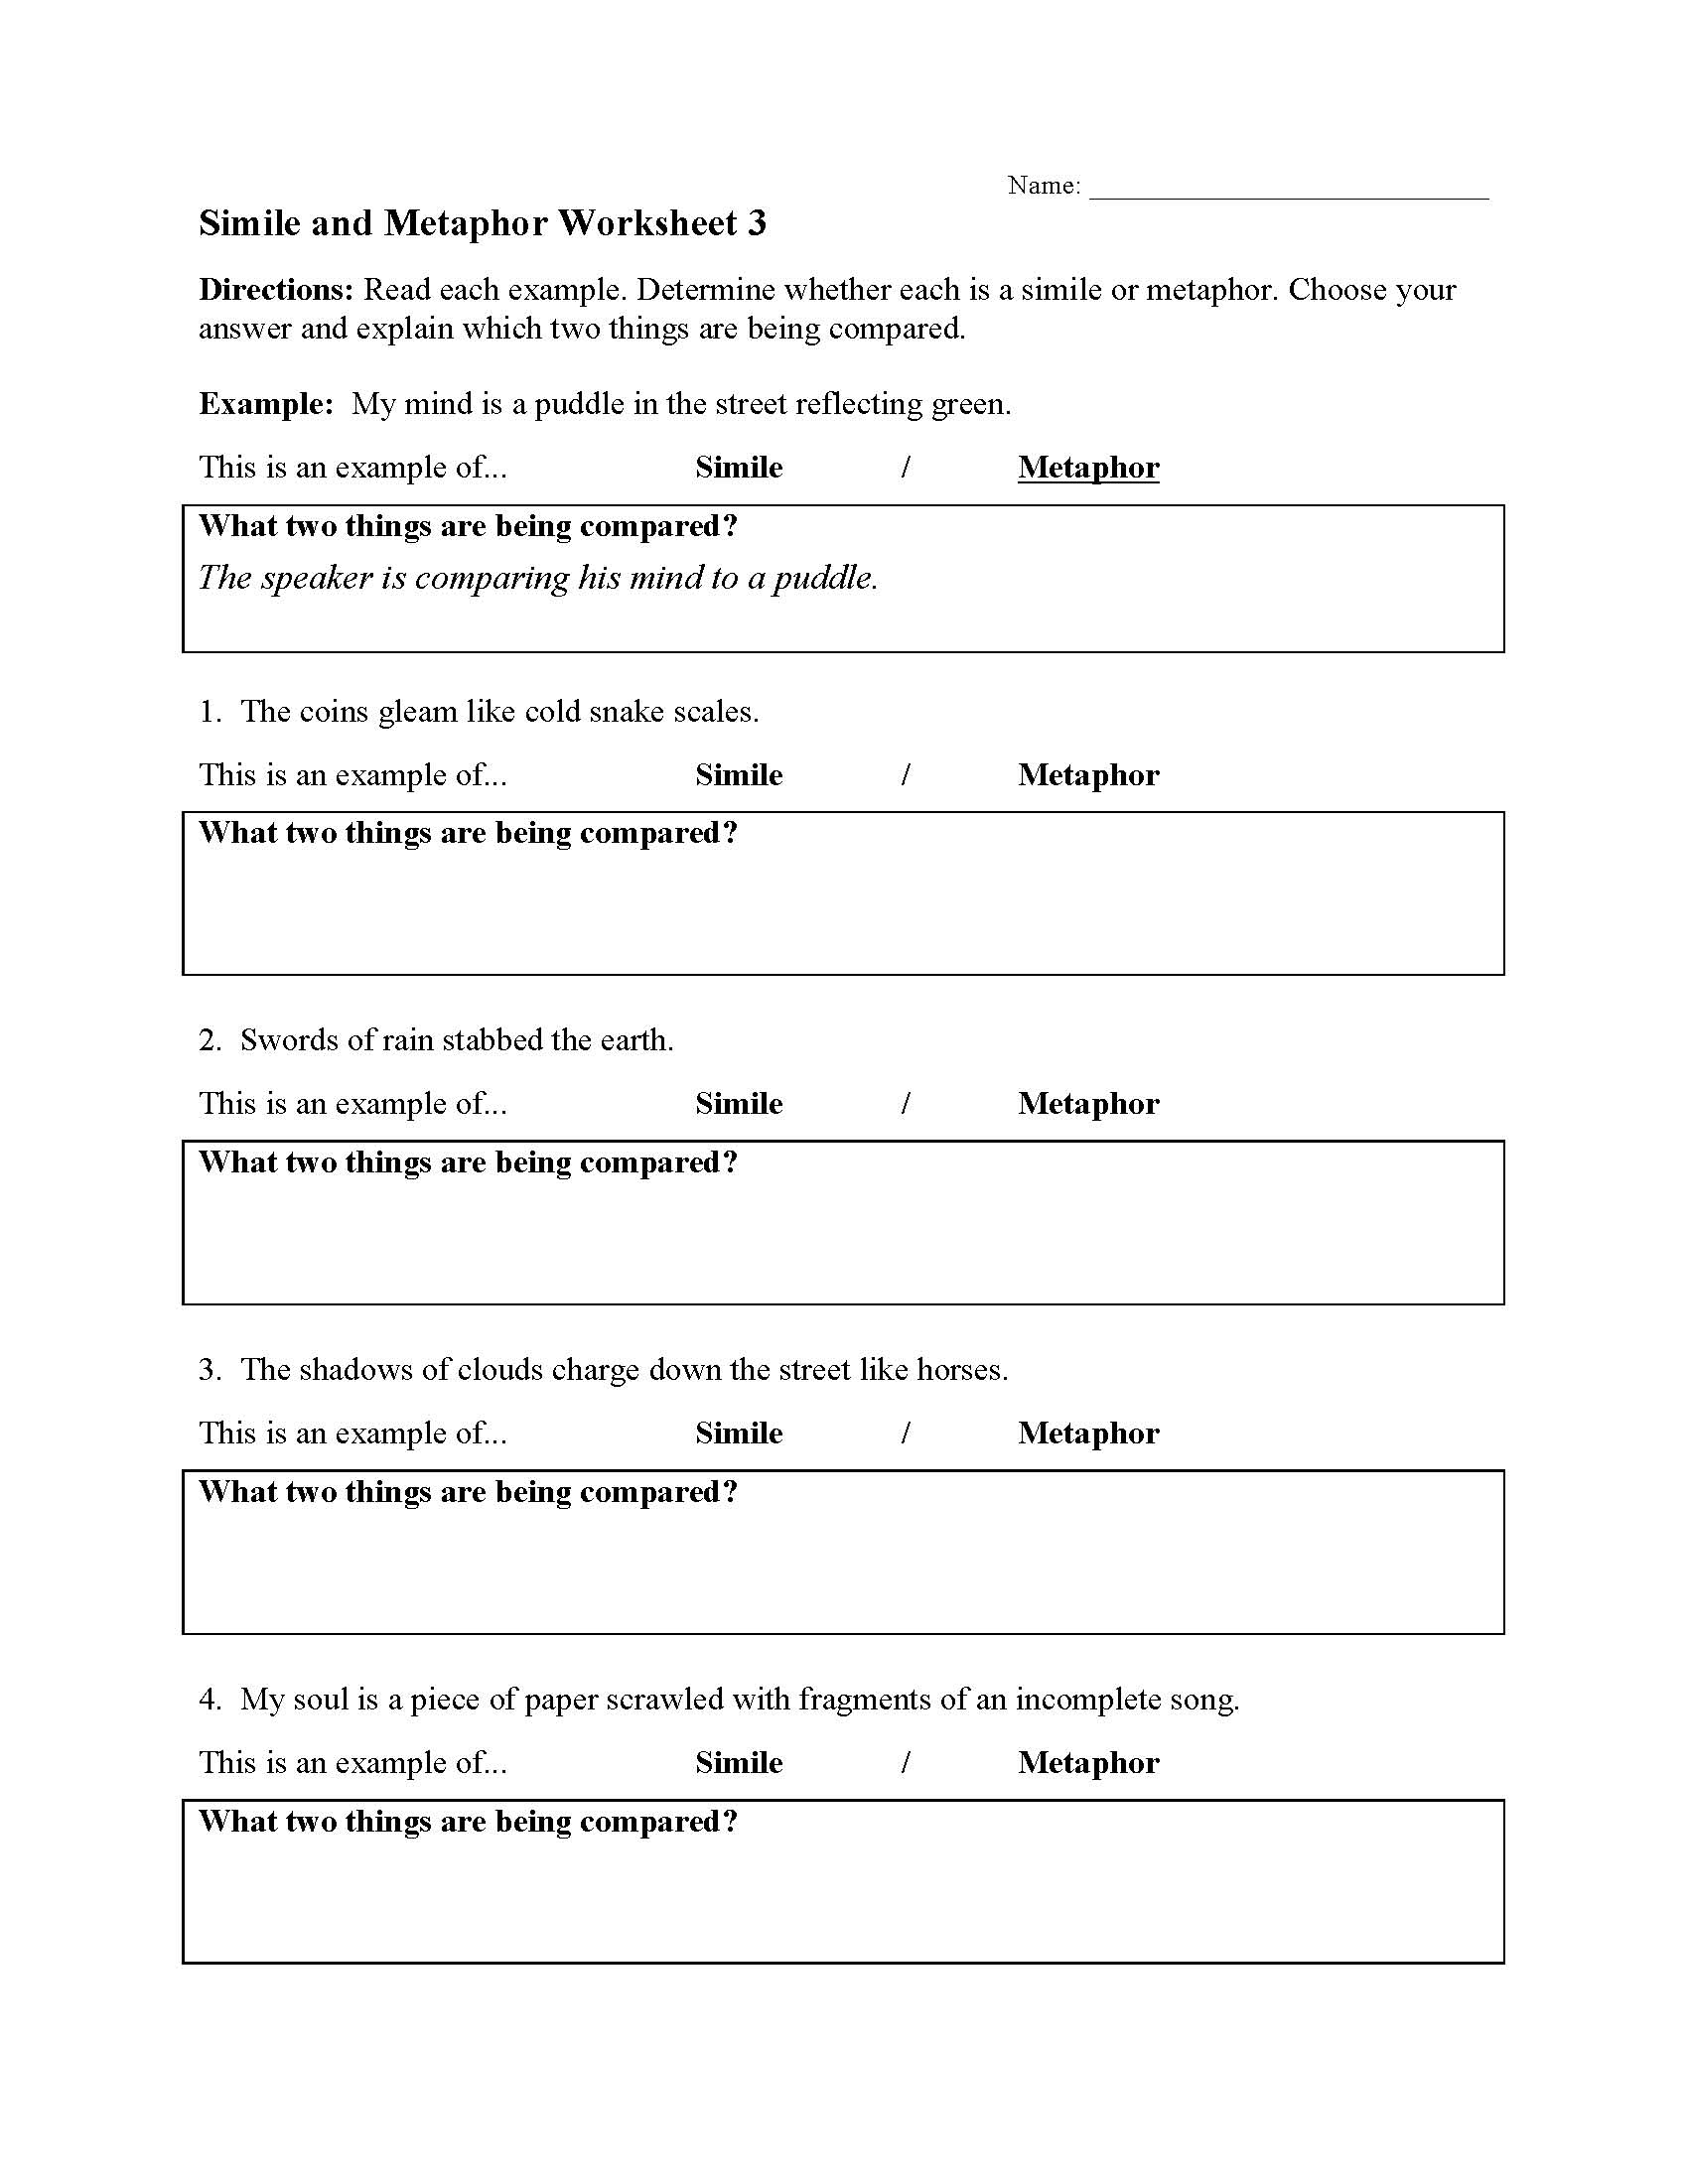 This is a preview image of Simile and Metaphor Worksheet 3. Click on it to enlarge it or view the source file.